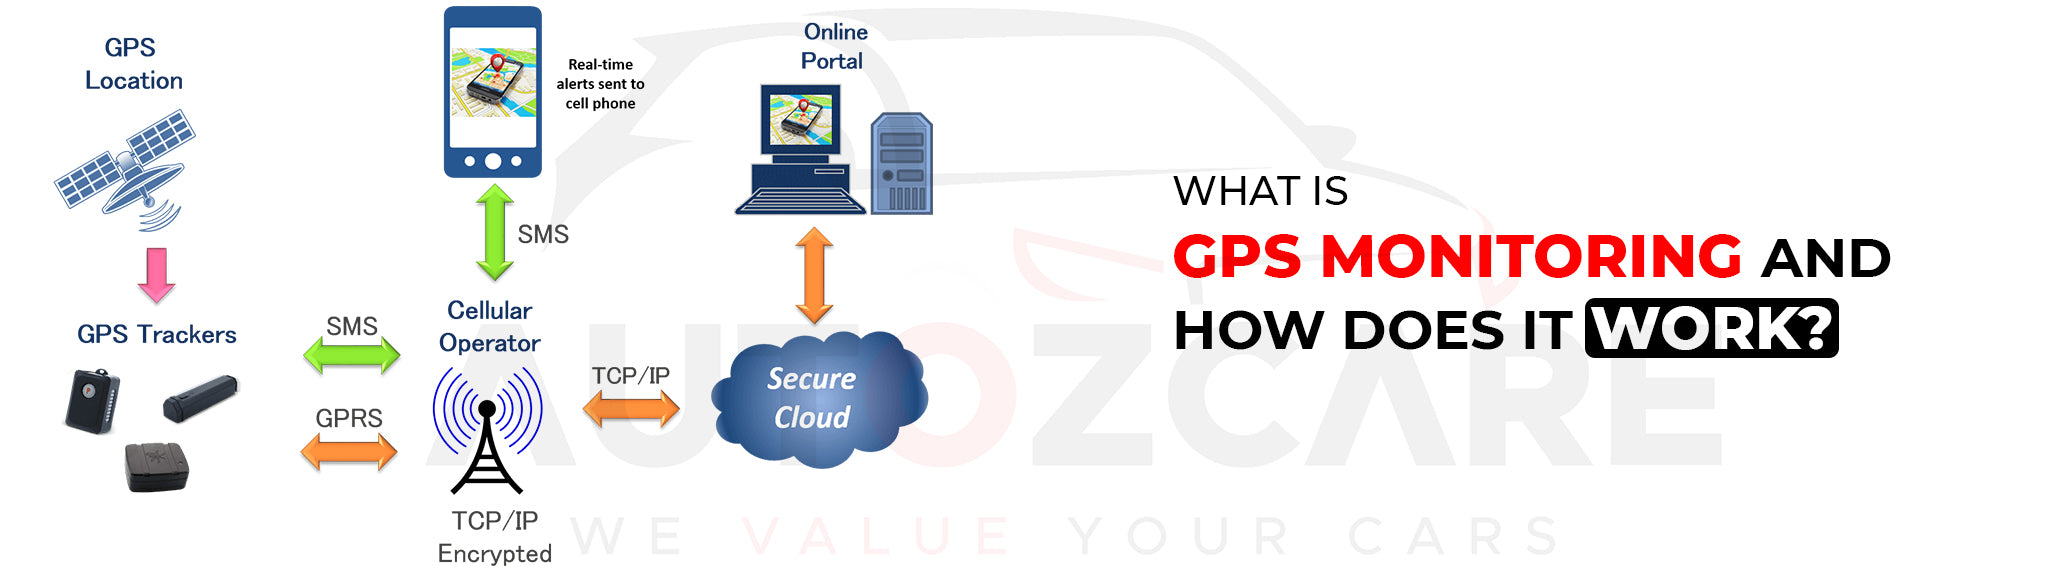 What is GPS monitoring and how does it work?